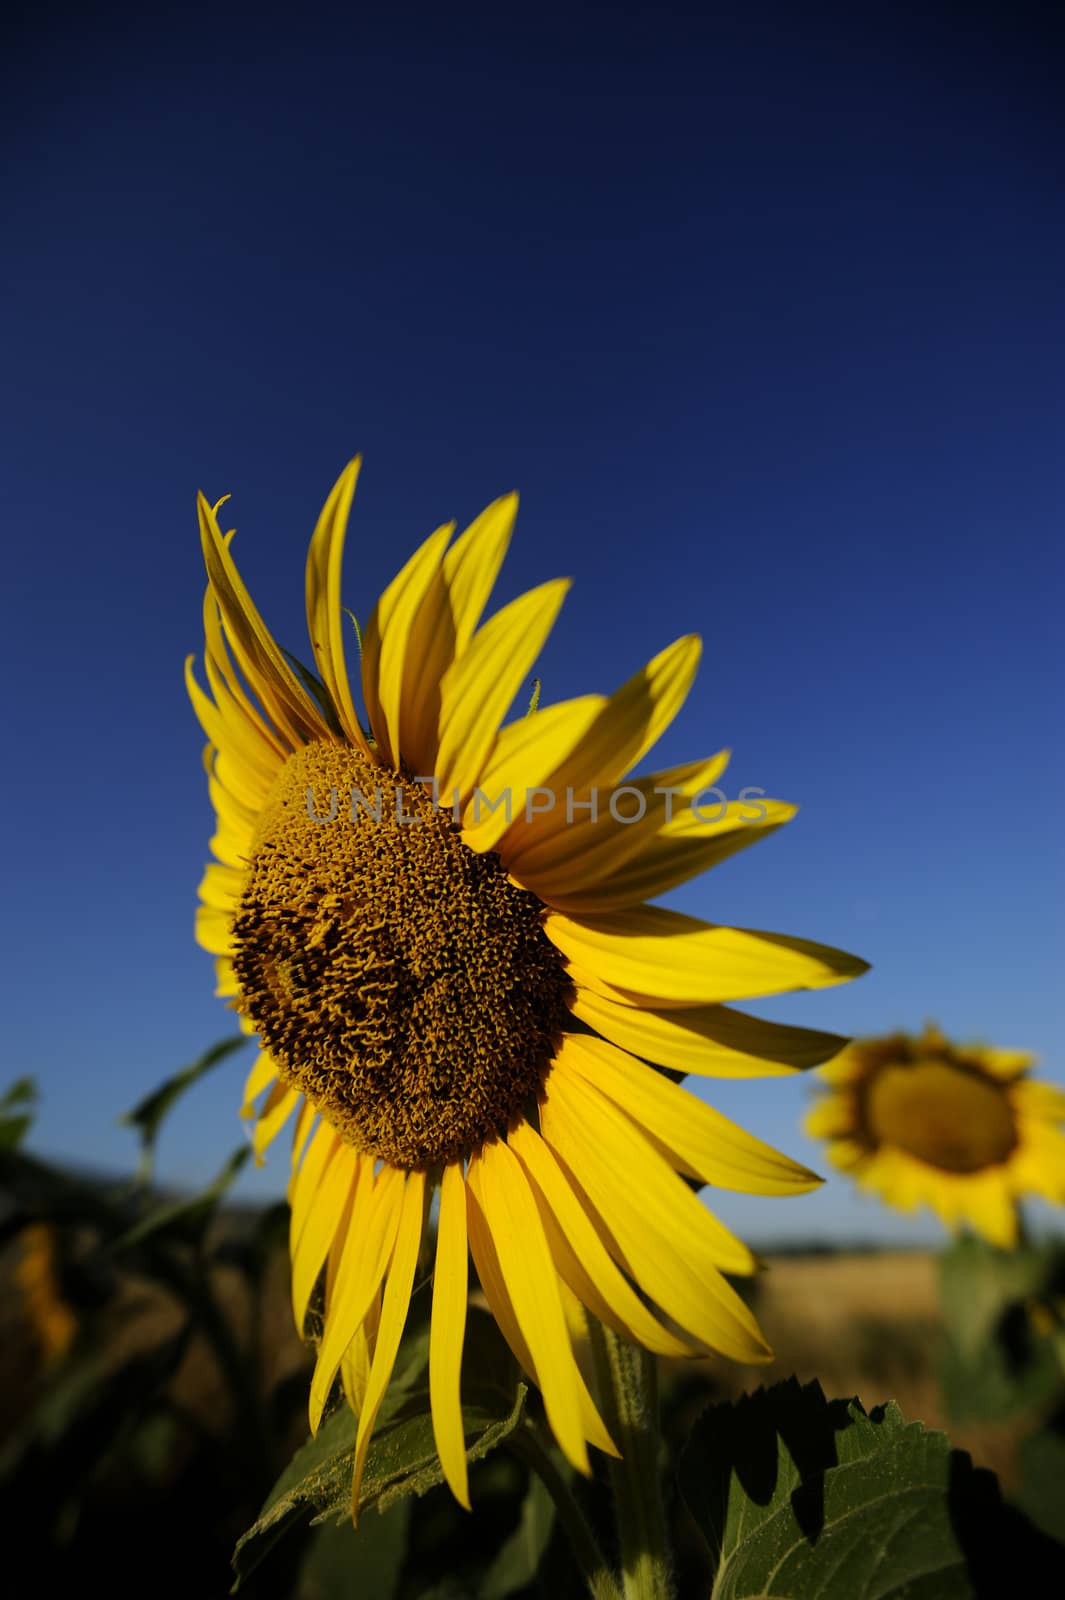 The warm yellow color os sunflowers announce summer